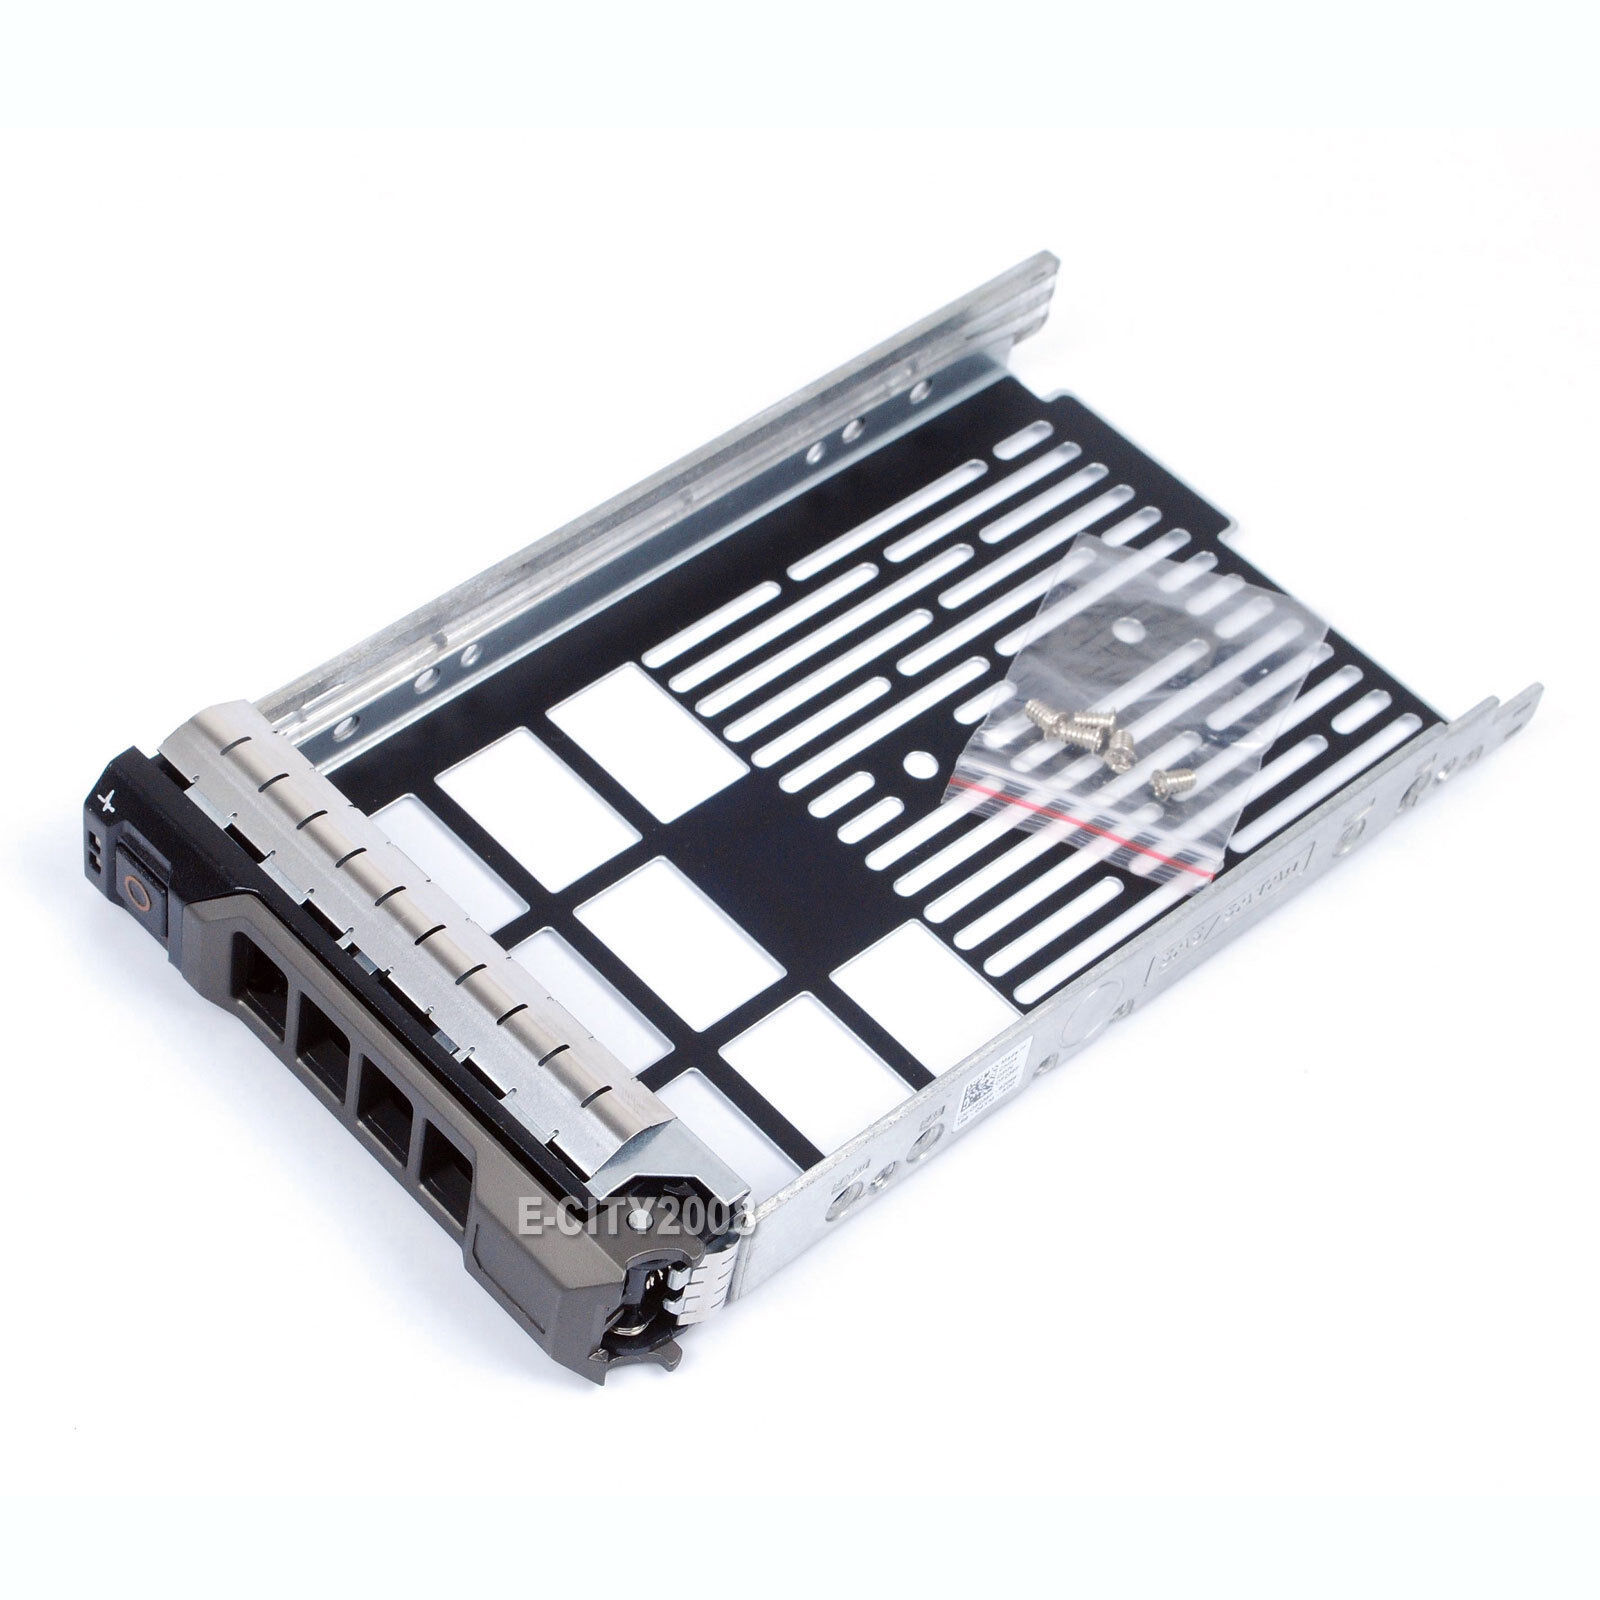 New 3.5" Inch SAS SATA HDD Tray Caddy for Dell PowerEdge T410 Ship From USA - £12.57 GBP